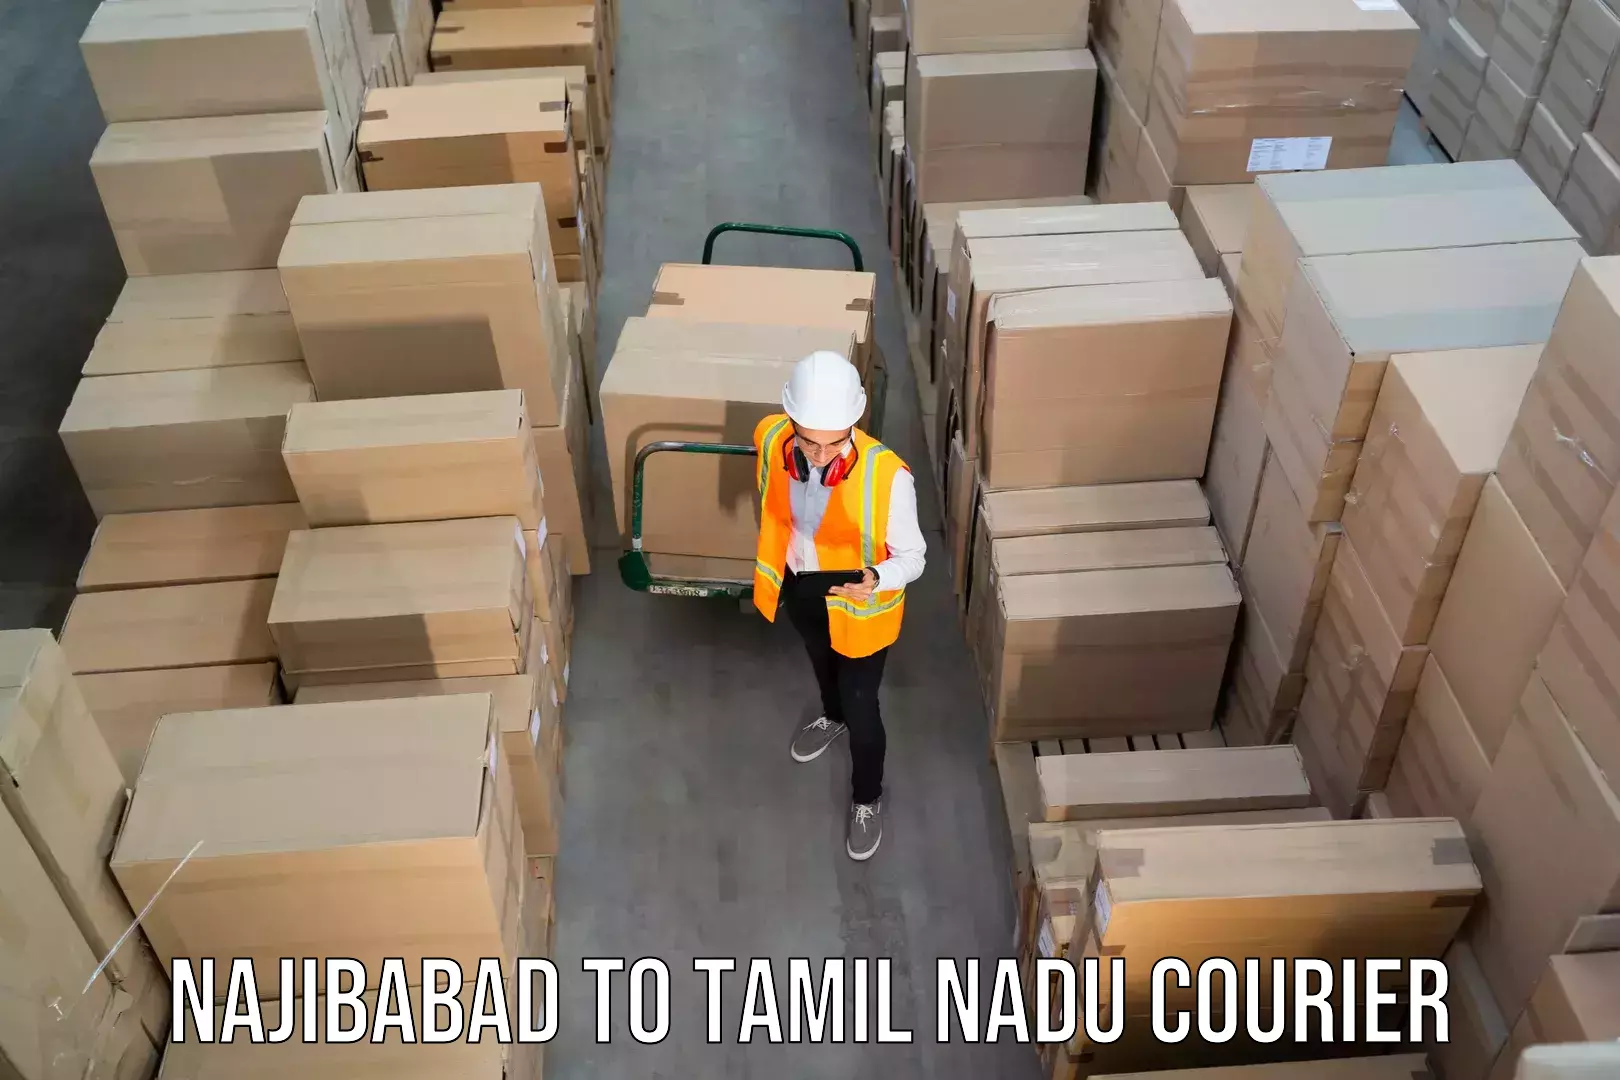 Courier service comparison Najibabad to Sirkali